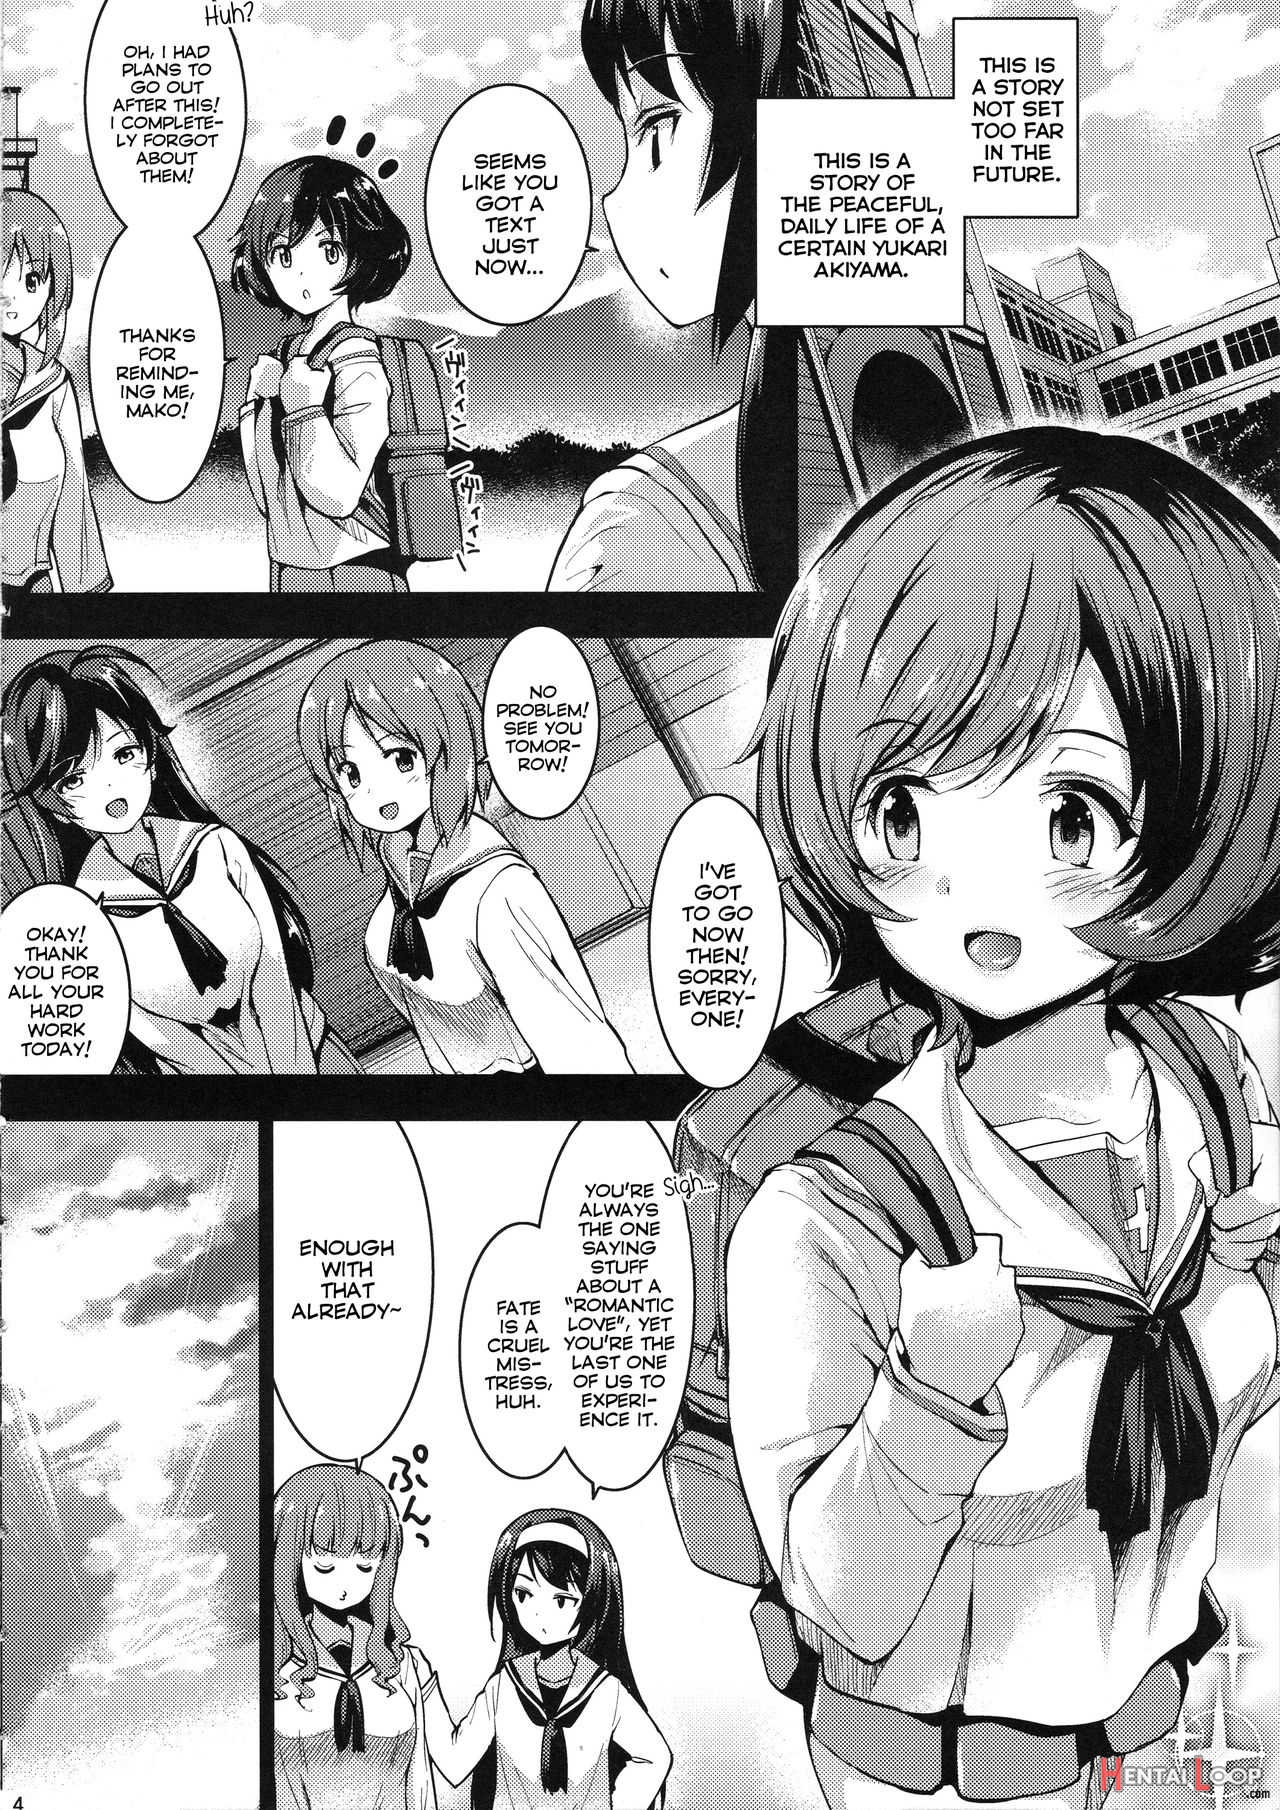 A Book Just About Filling Yukari Akiyama With Projectiles! page 4